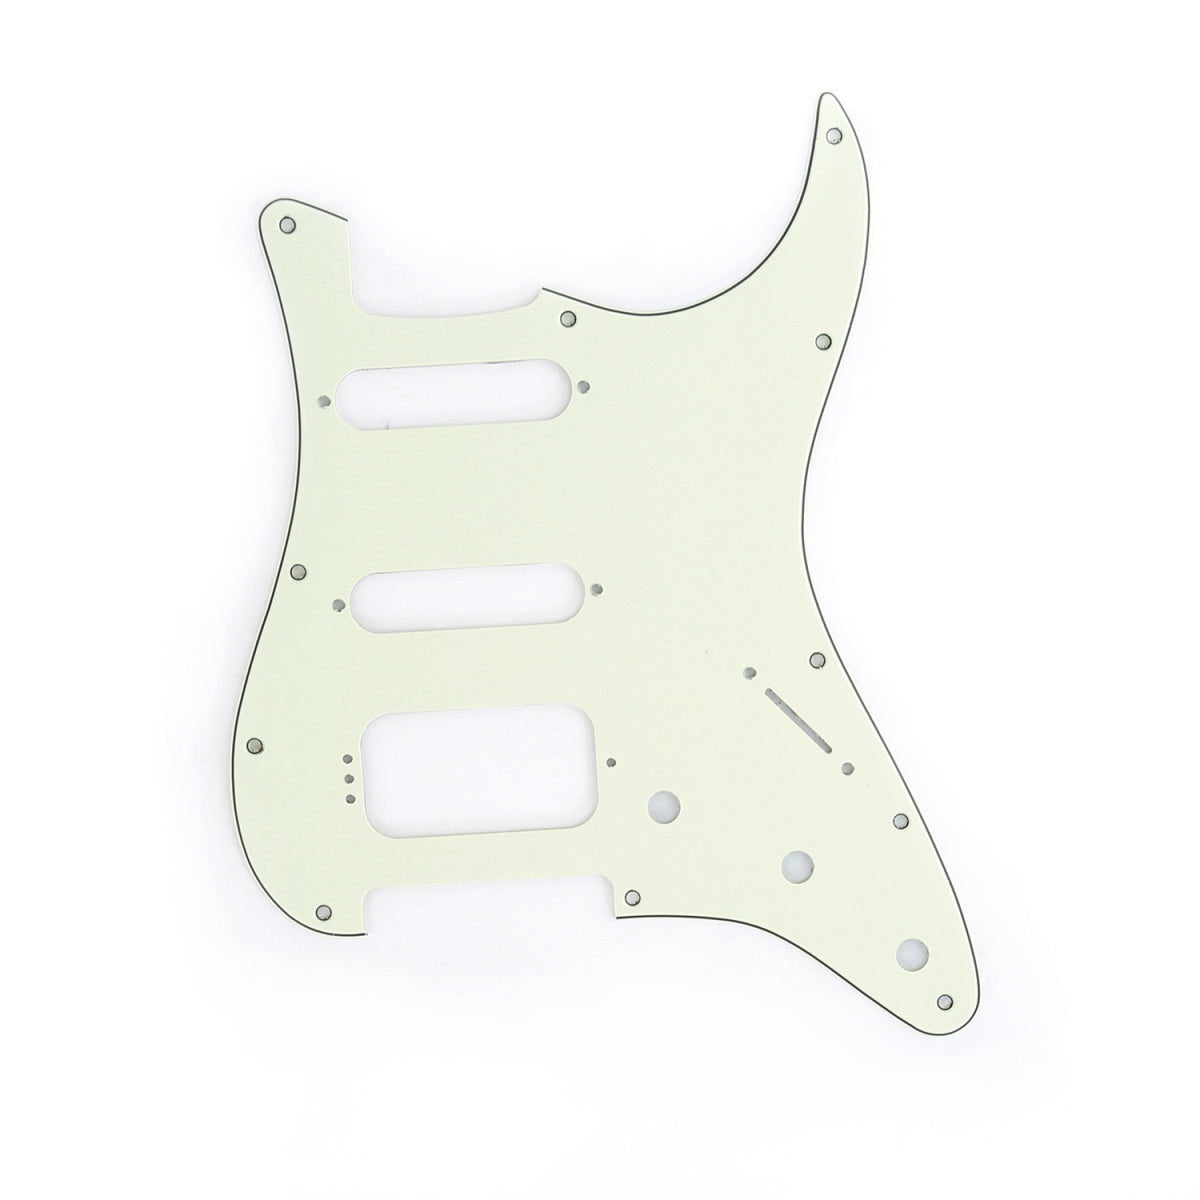 Musiclily Pro 11-Hole Round Corner HSS Guitar Strat Pickguard for USA/Mexican Stratocaster 4-screw Humbucking Mounting Open Pickup, 3Ply Mint Green